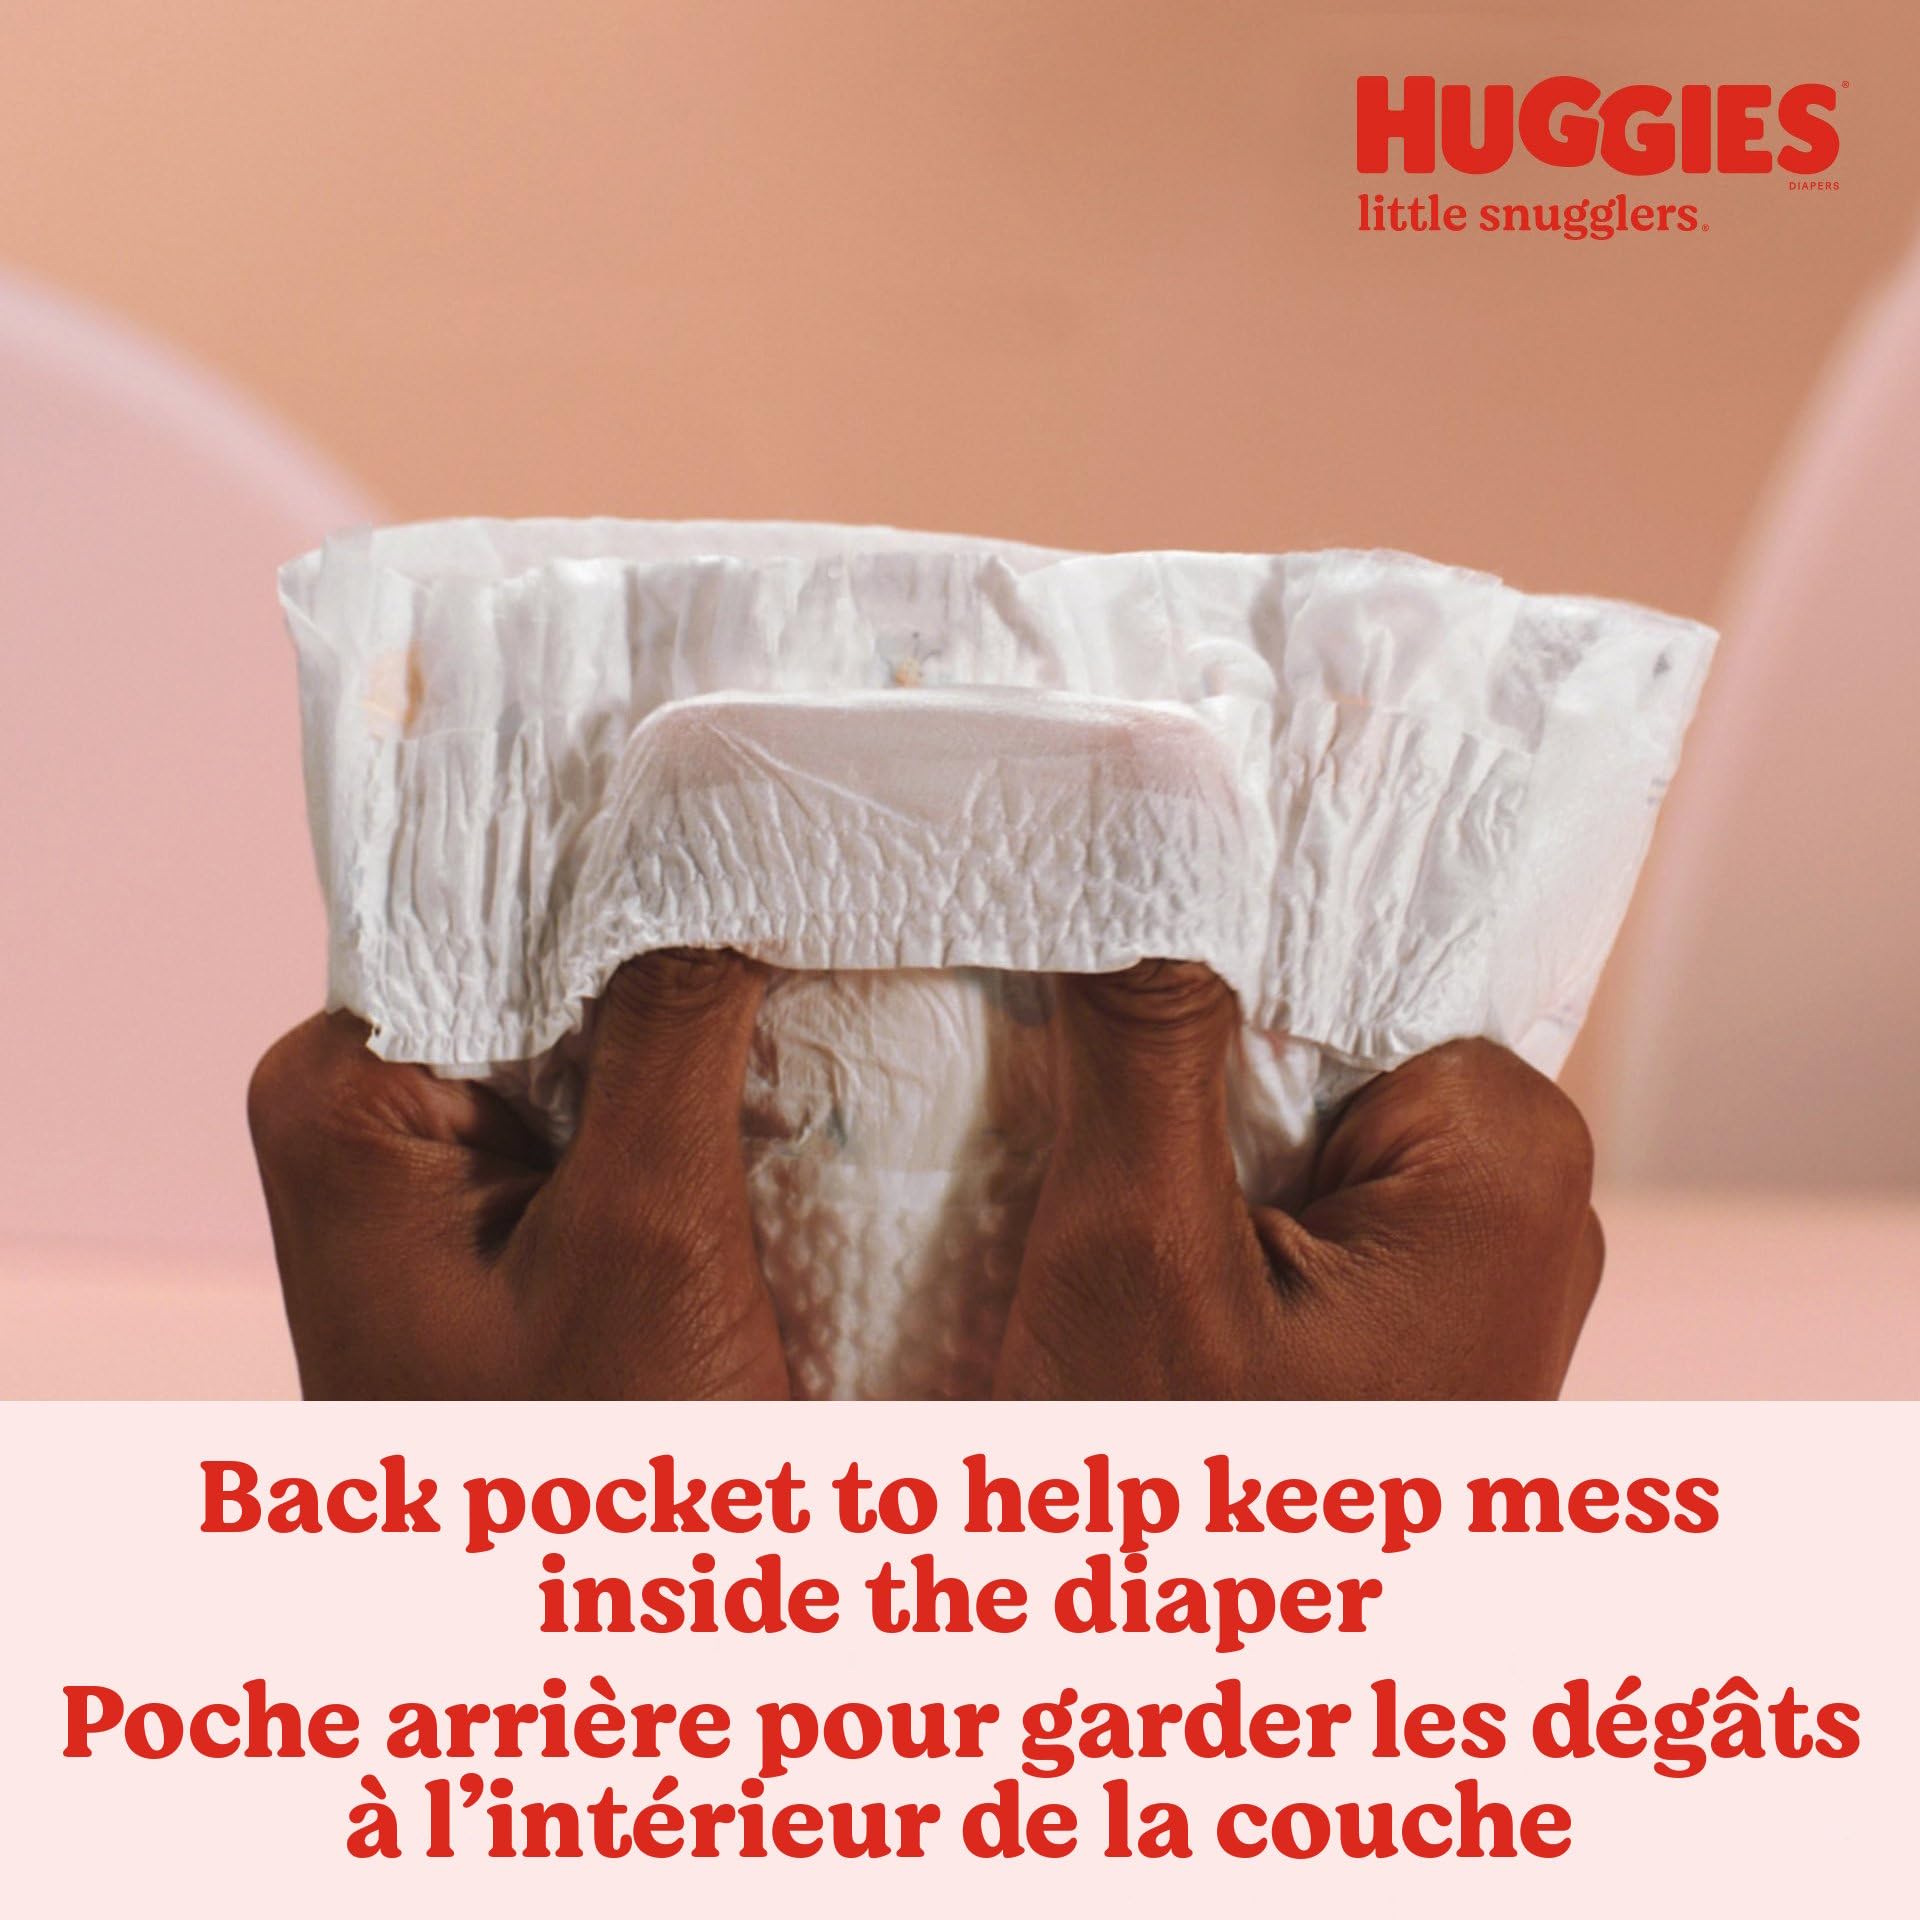 HUGGIES Little Snugglers Baby Diapers, Size Preemie, 30 Count, Convenience Pack (Packaging May Vary)